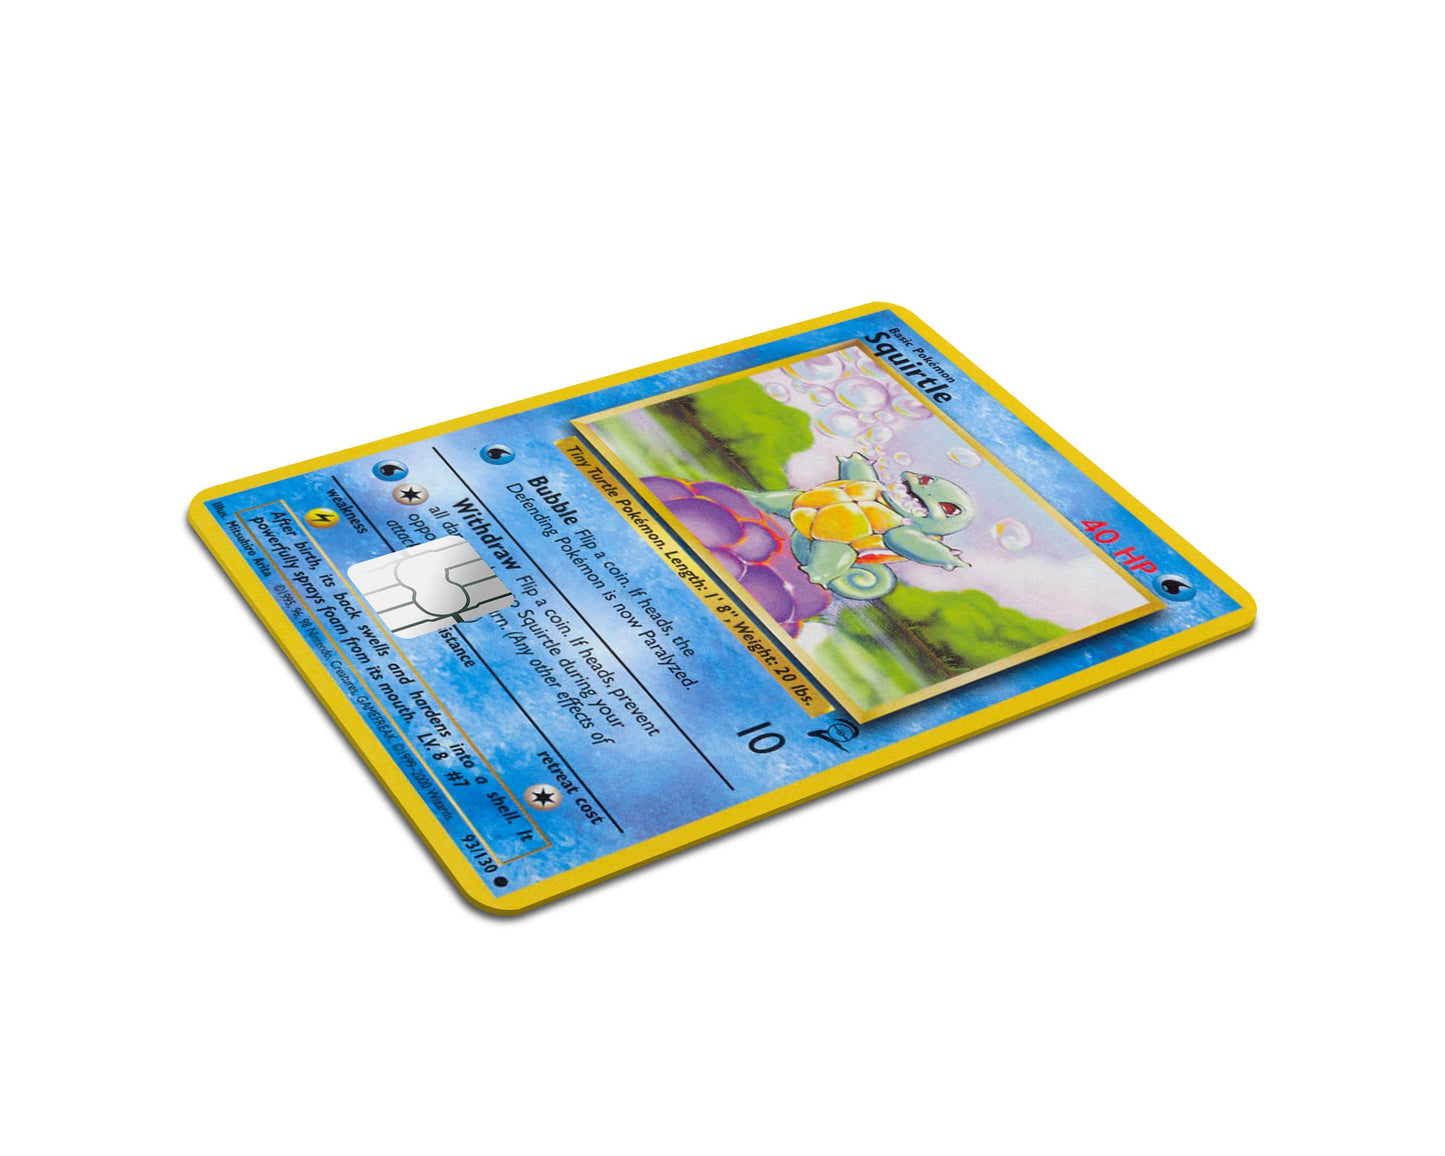 Anime Town Creations Credit Card Squirtle Pokemon Card Full Skins - Anime Pokemon Skin